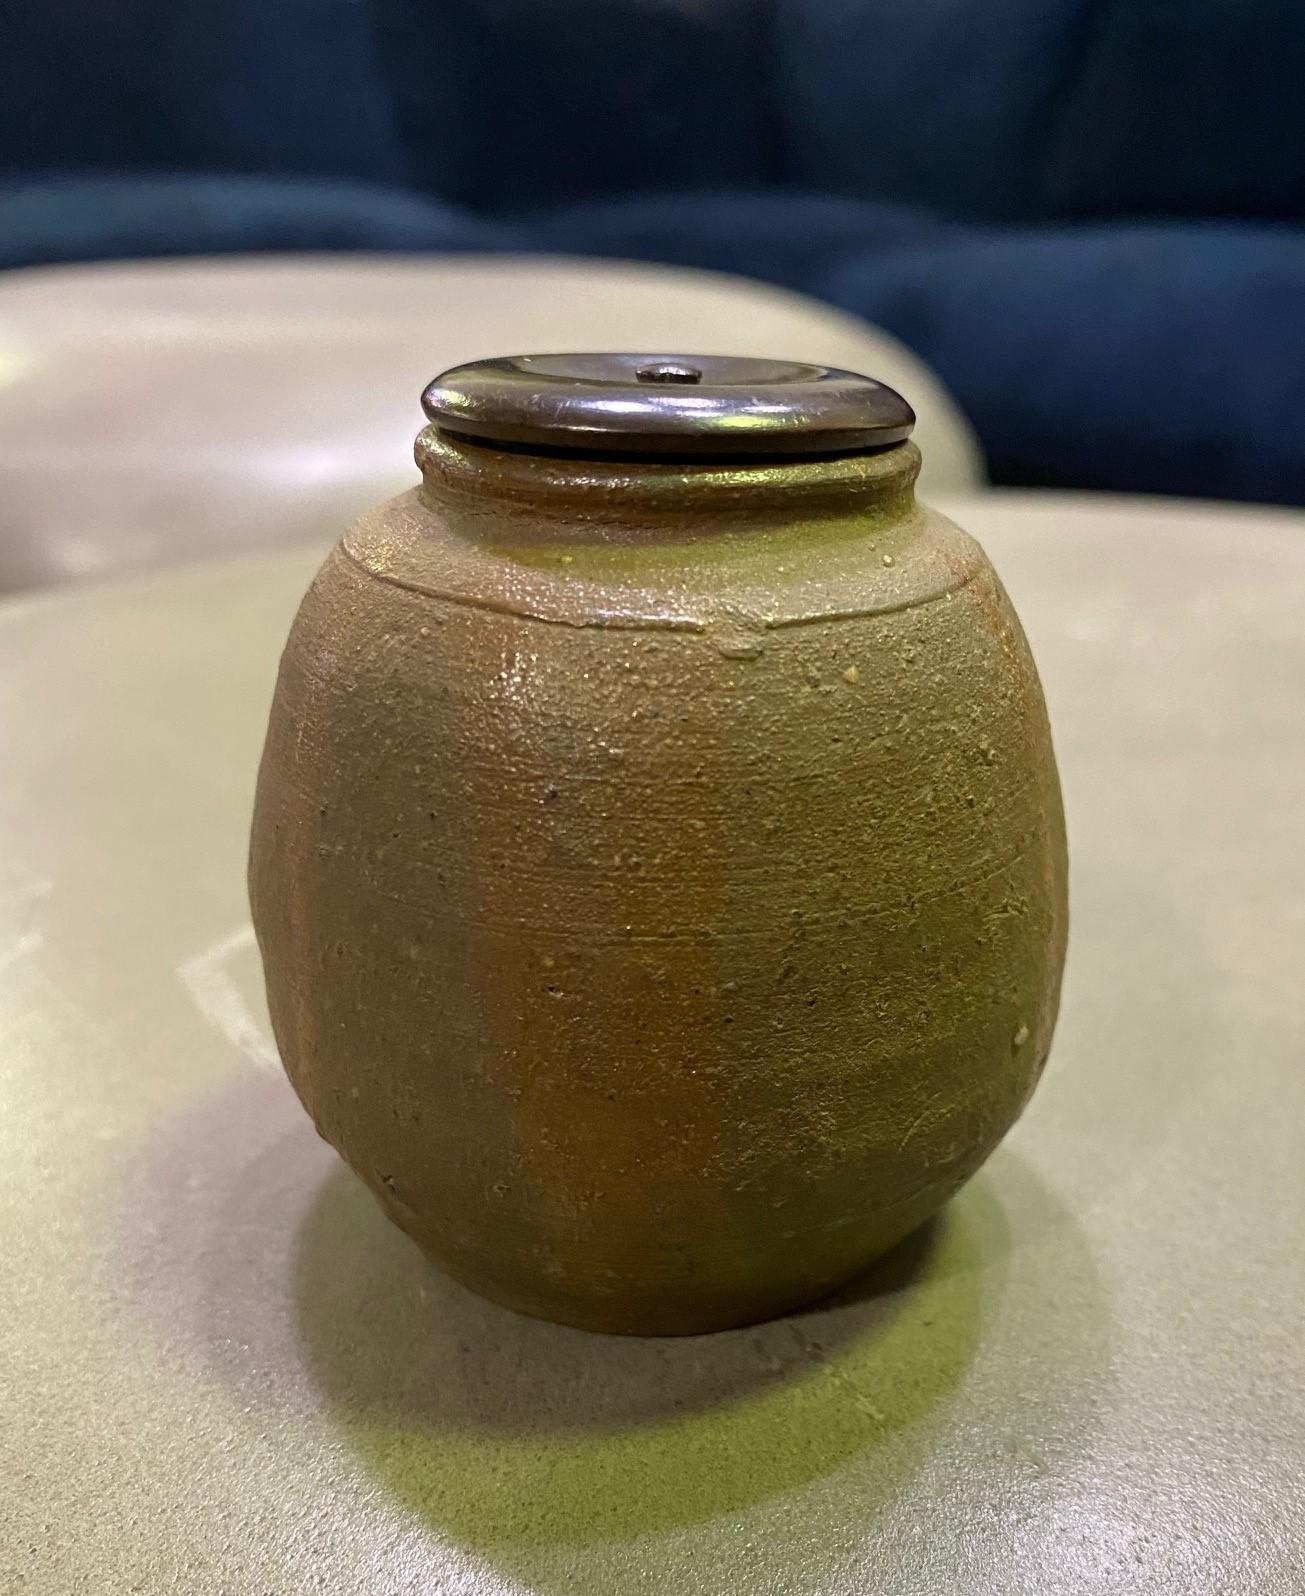 A beautiful gem of Bizen ware by renowned Japanese master potter Kaneshige Toyo. Kaneshige was deemed a Living National Treasure (Important Intangible Cultural Heritage) in 1956 for his work in Bizen Ware style ceramics.

The piece is signed/